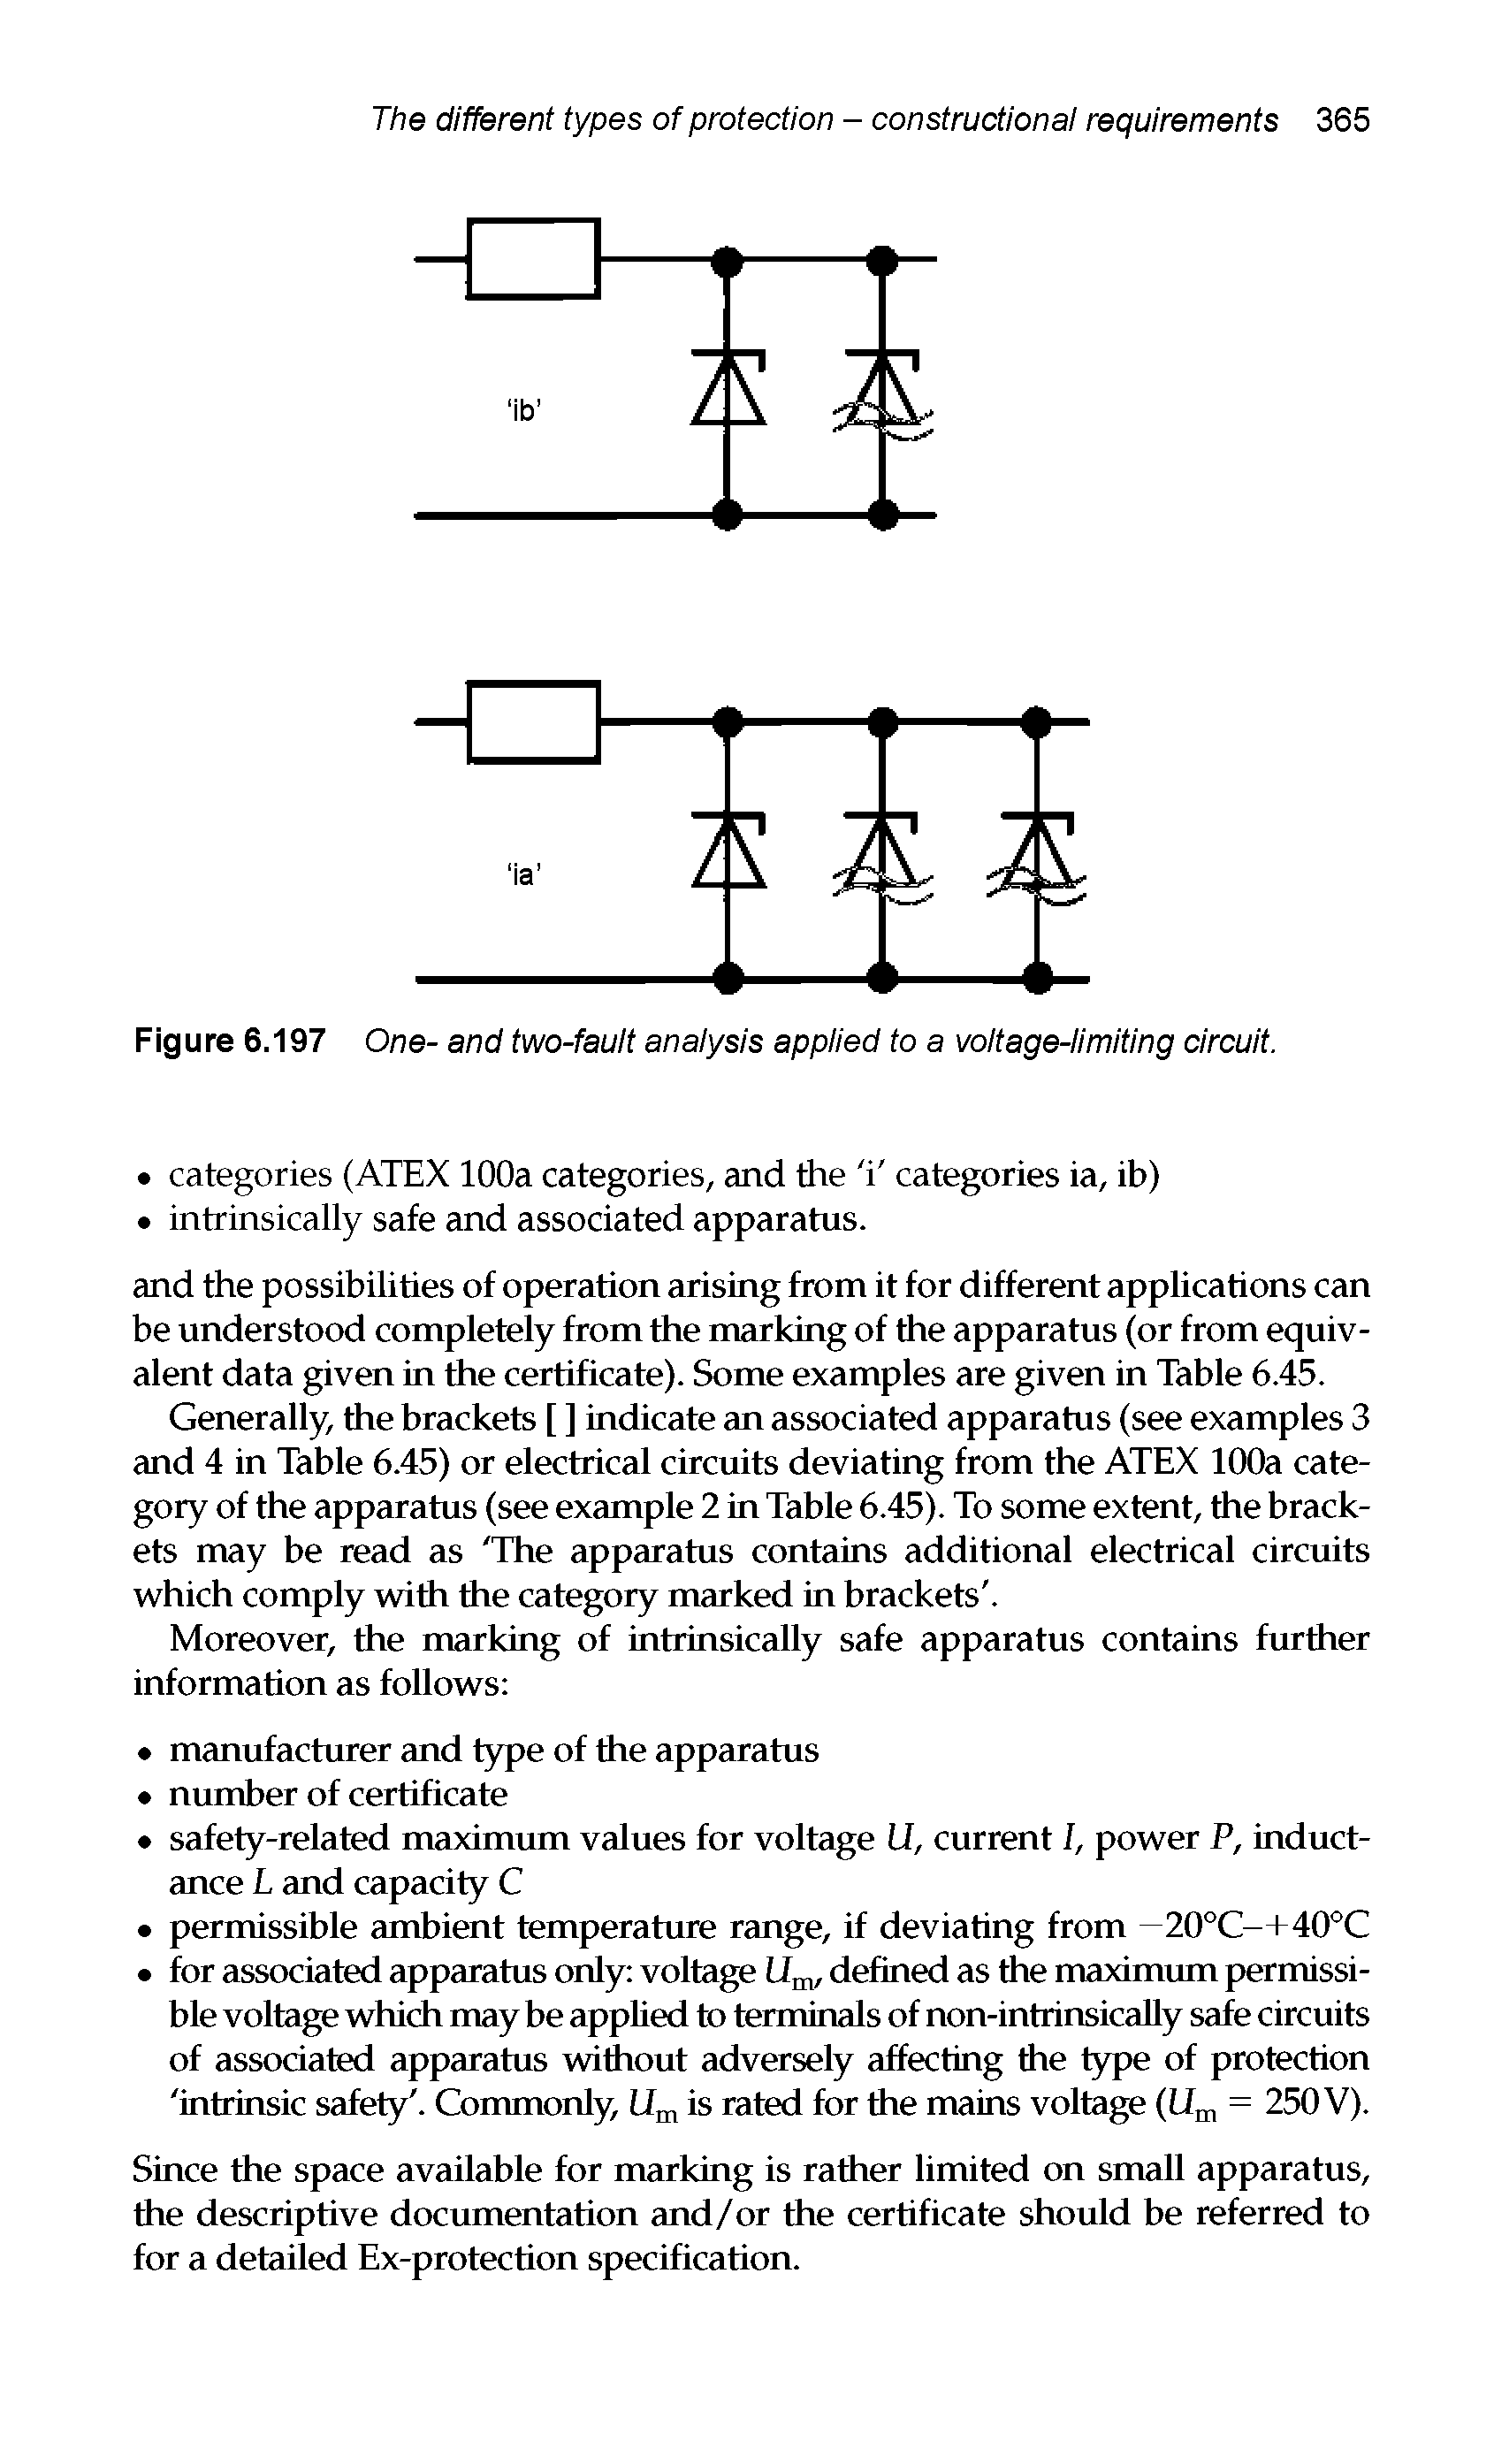 Figure 6.197 One- and two-fault analysis applied to a voltage-limiting circuit.